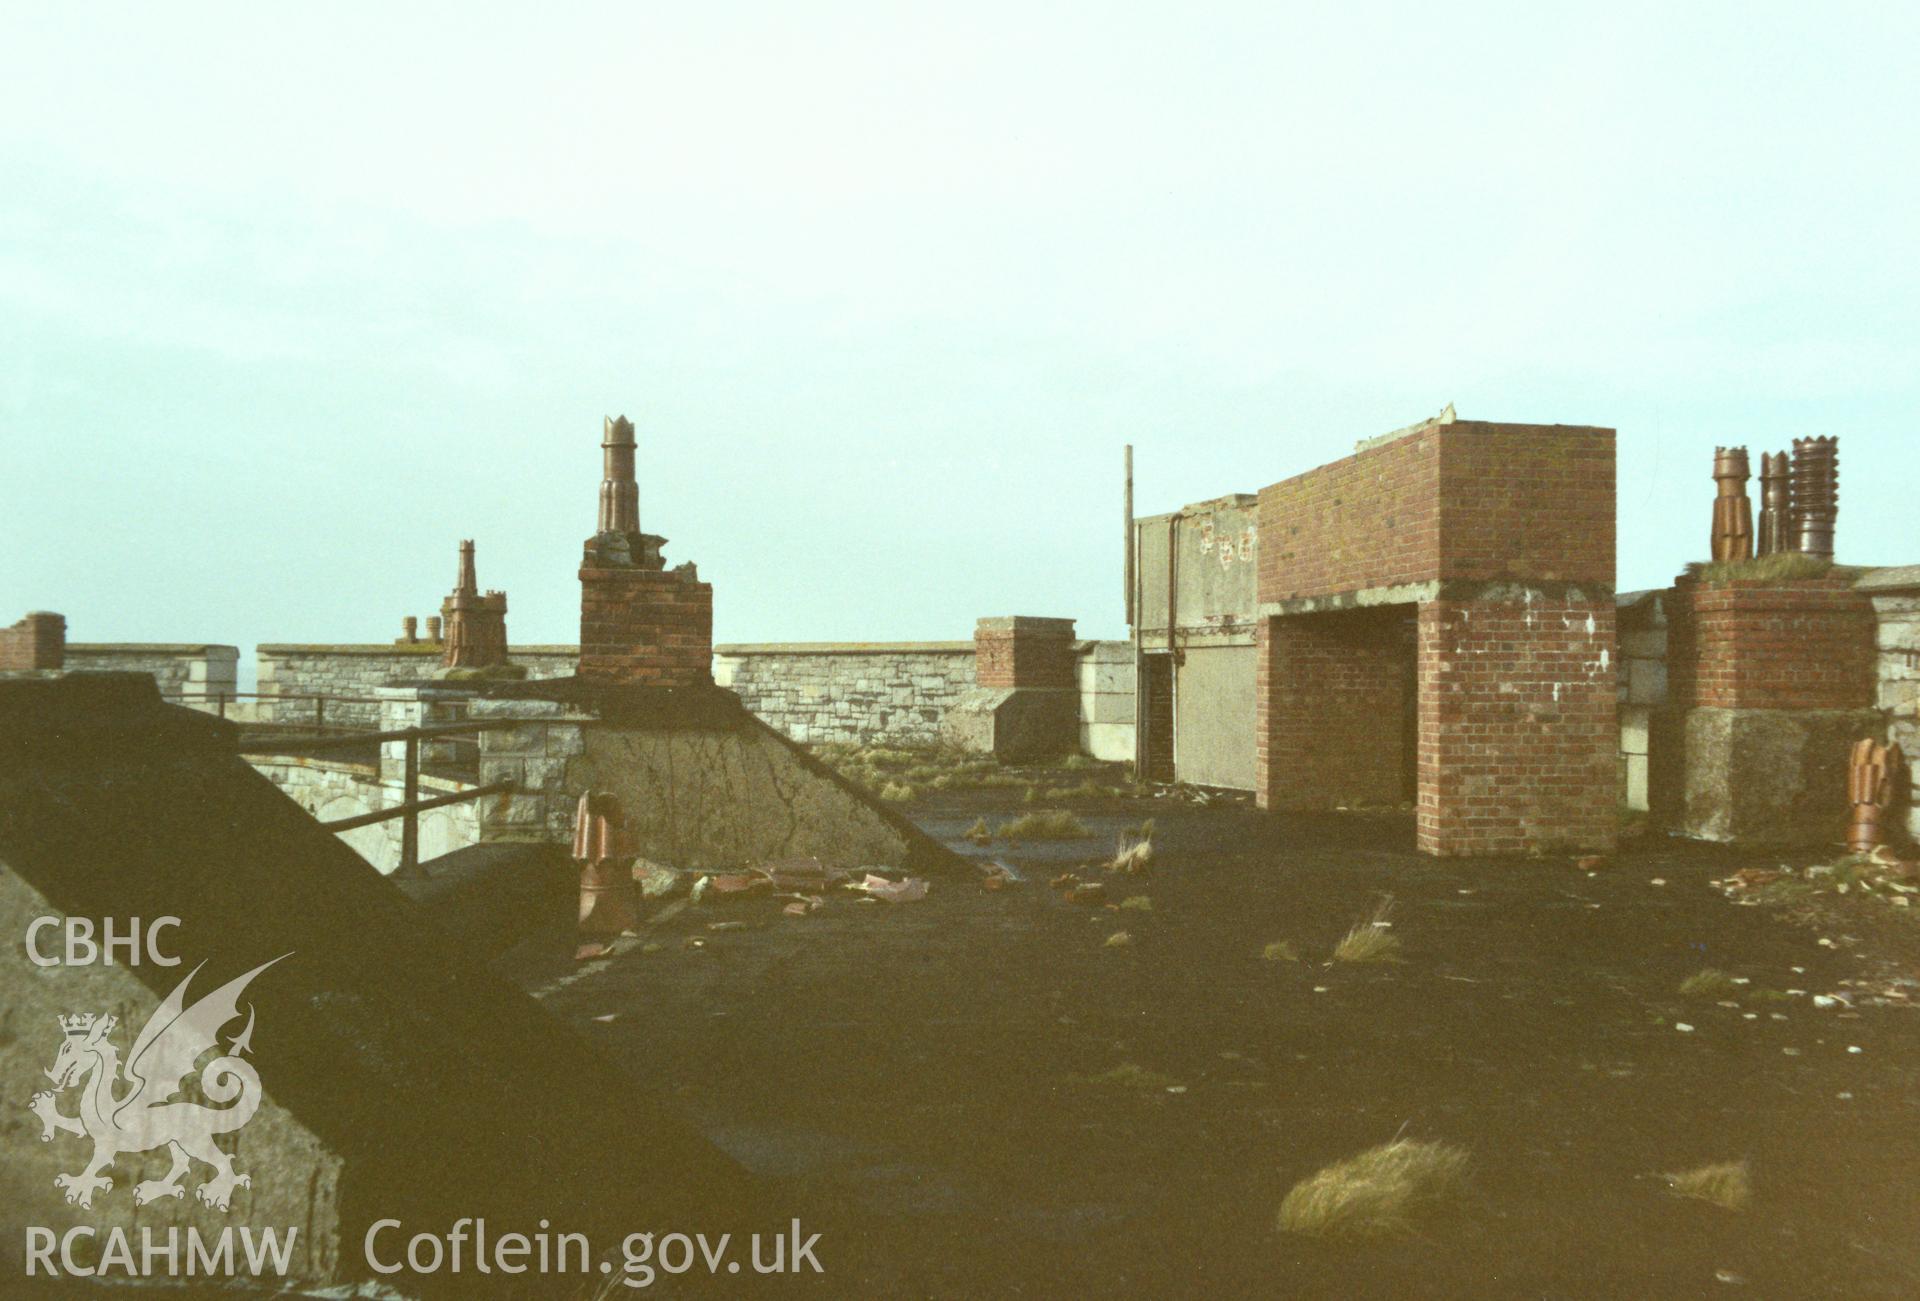 View of the roof at South Hook Fort taken by W. Jones of Cadw circa 1991.